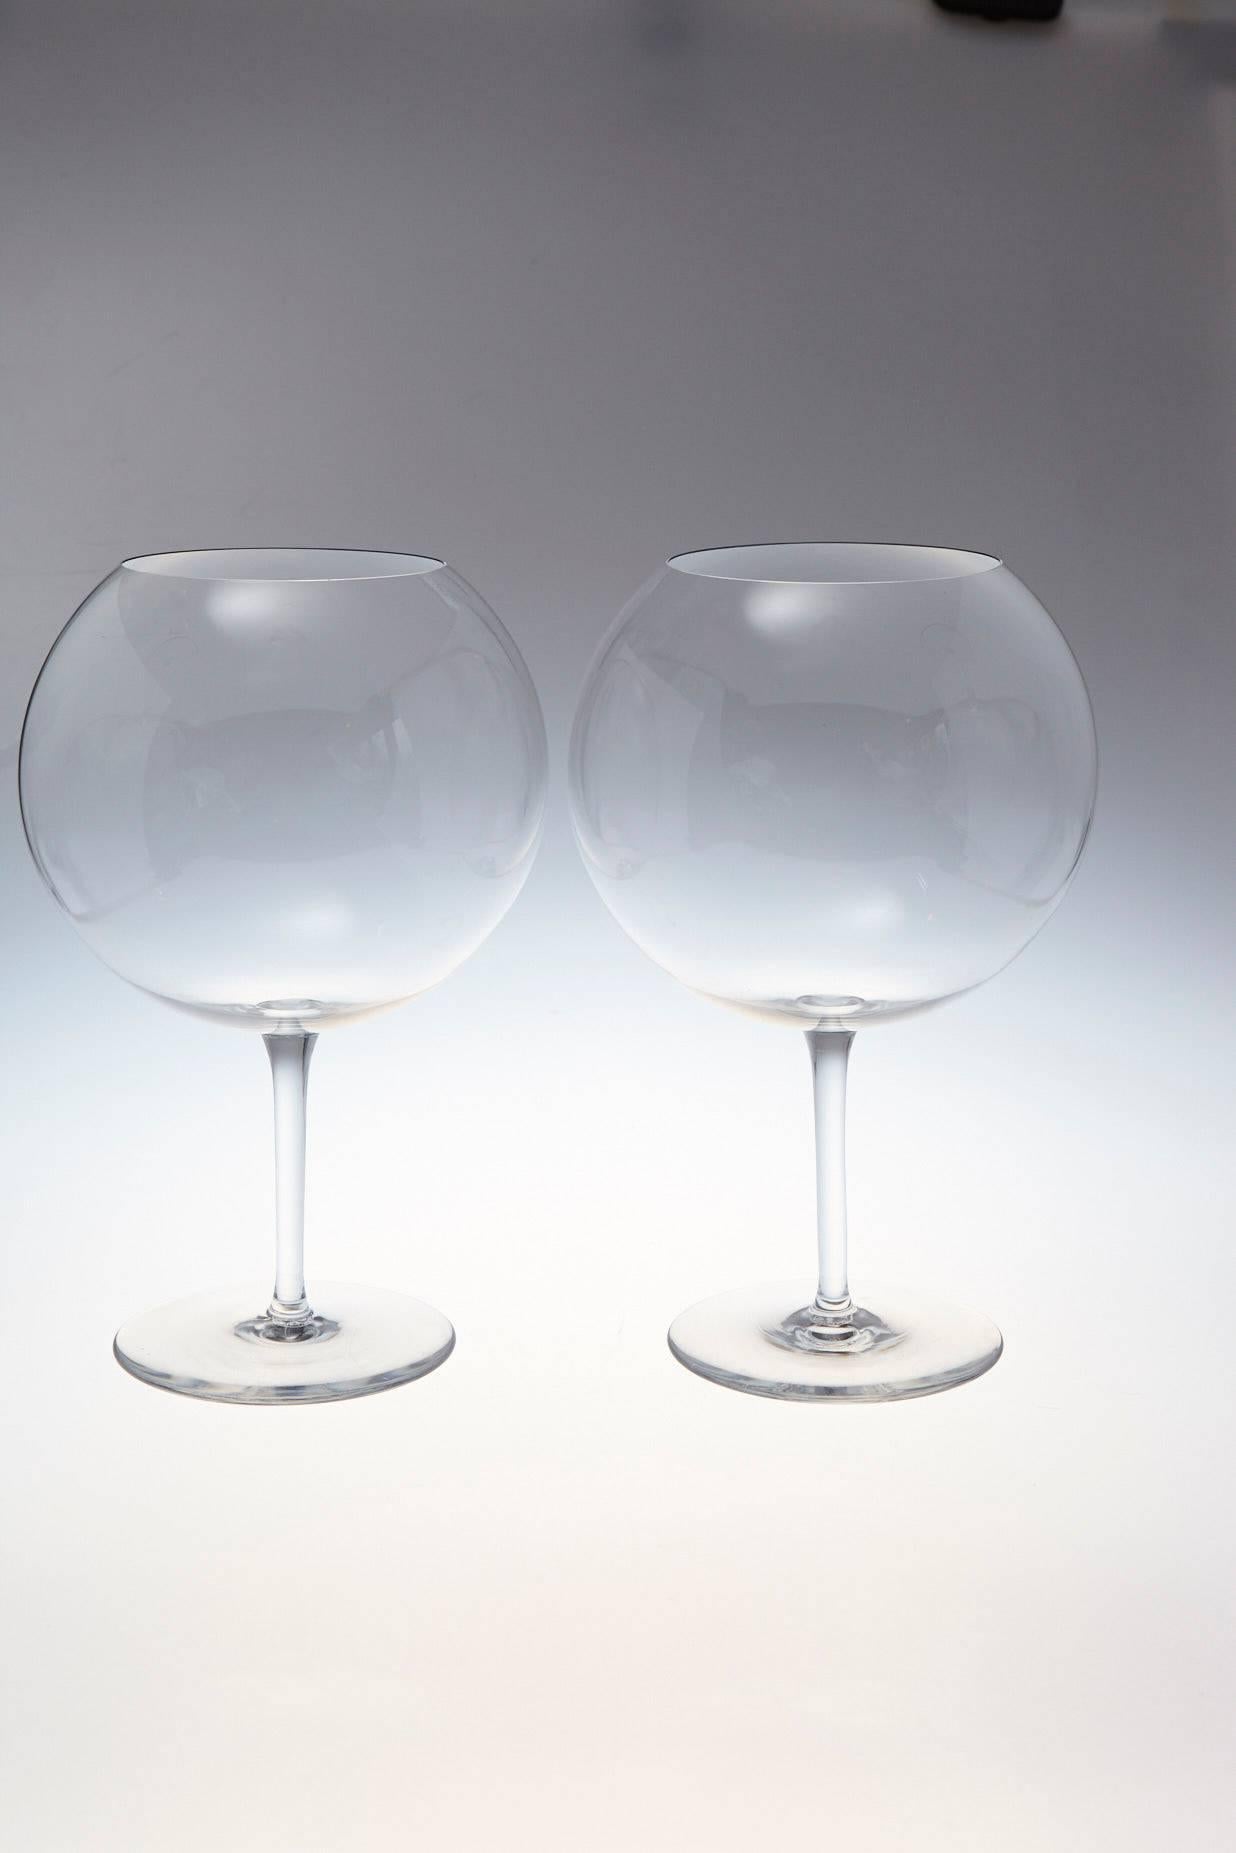 Two beautiful Baccarat crystal balloon shape tasting wine glasses with a striking Silhouette.
The ample balloon shape allows for complete oxygenation and brings out perfectly the nuances and taste of the finest grand cru.
Capacity 50.7 oz -